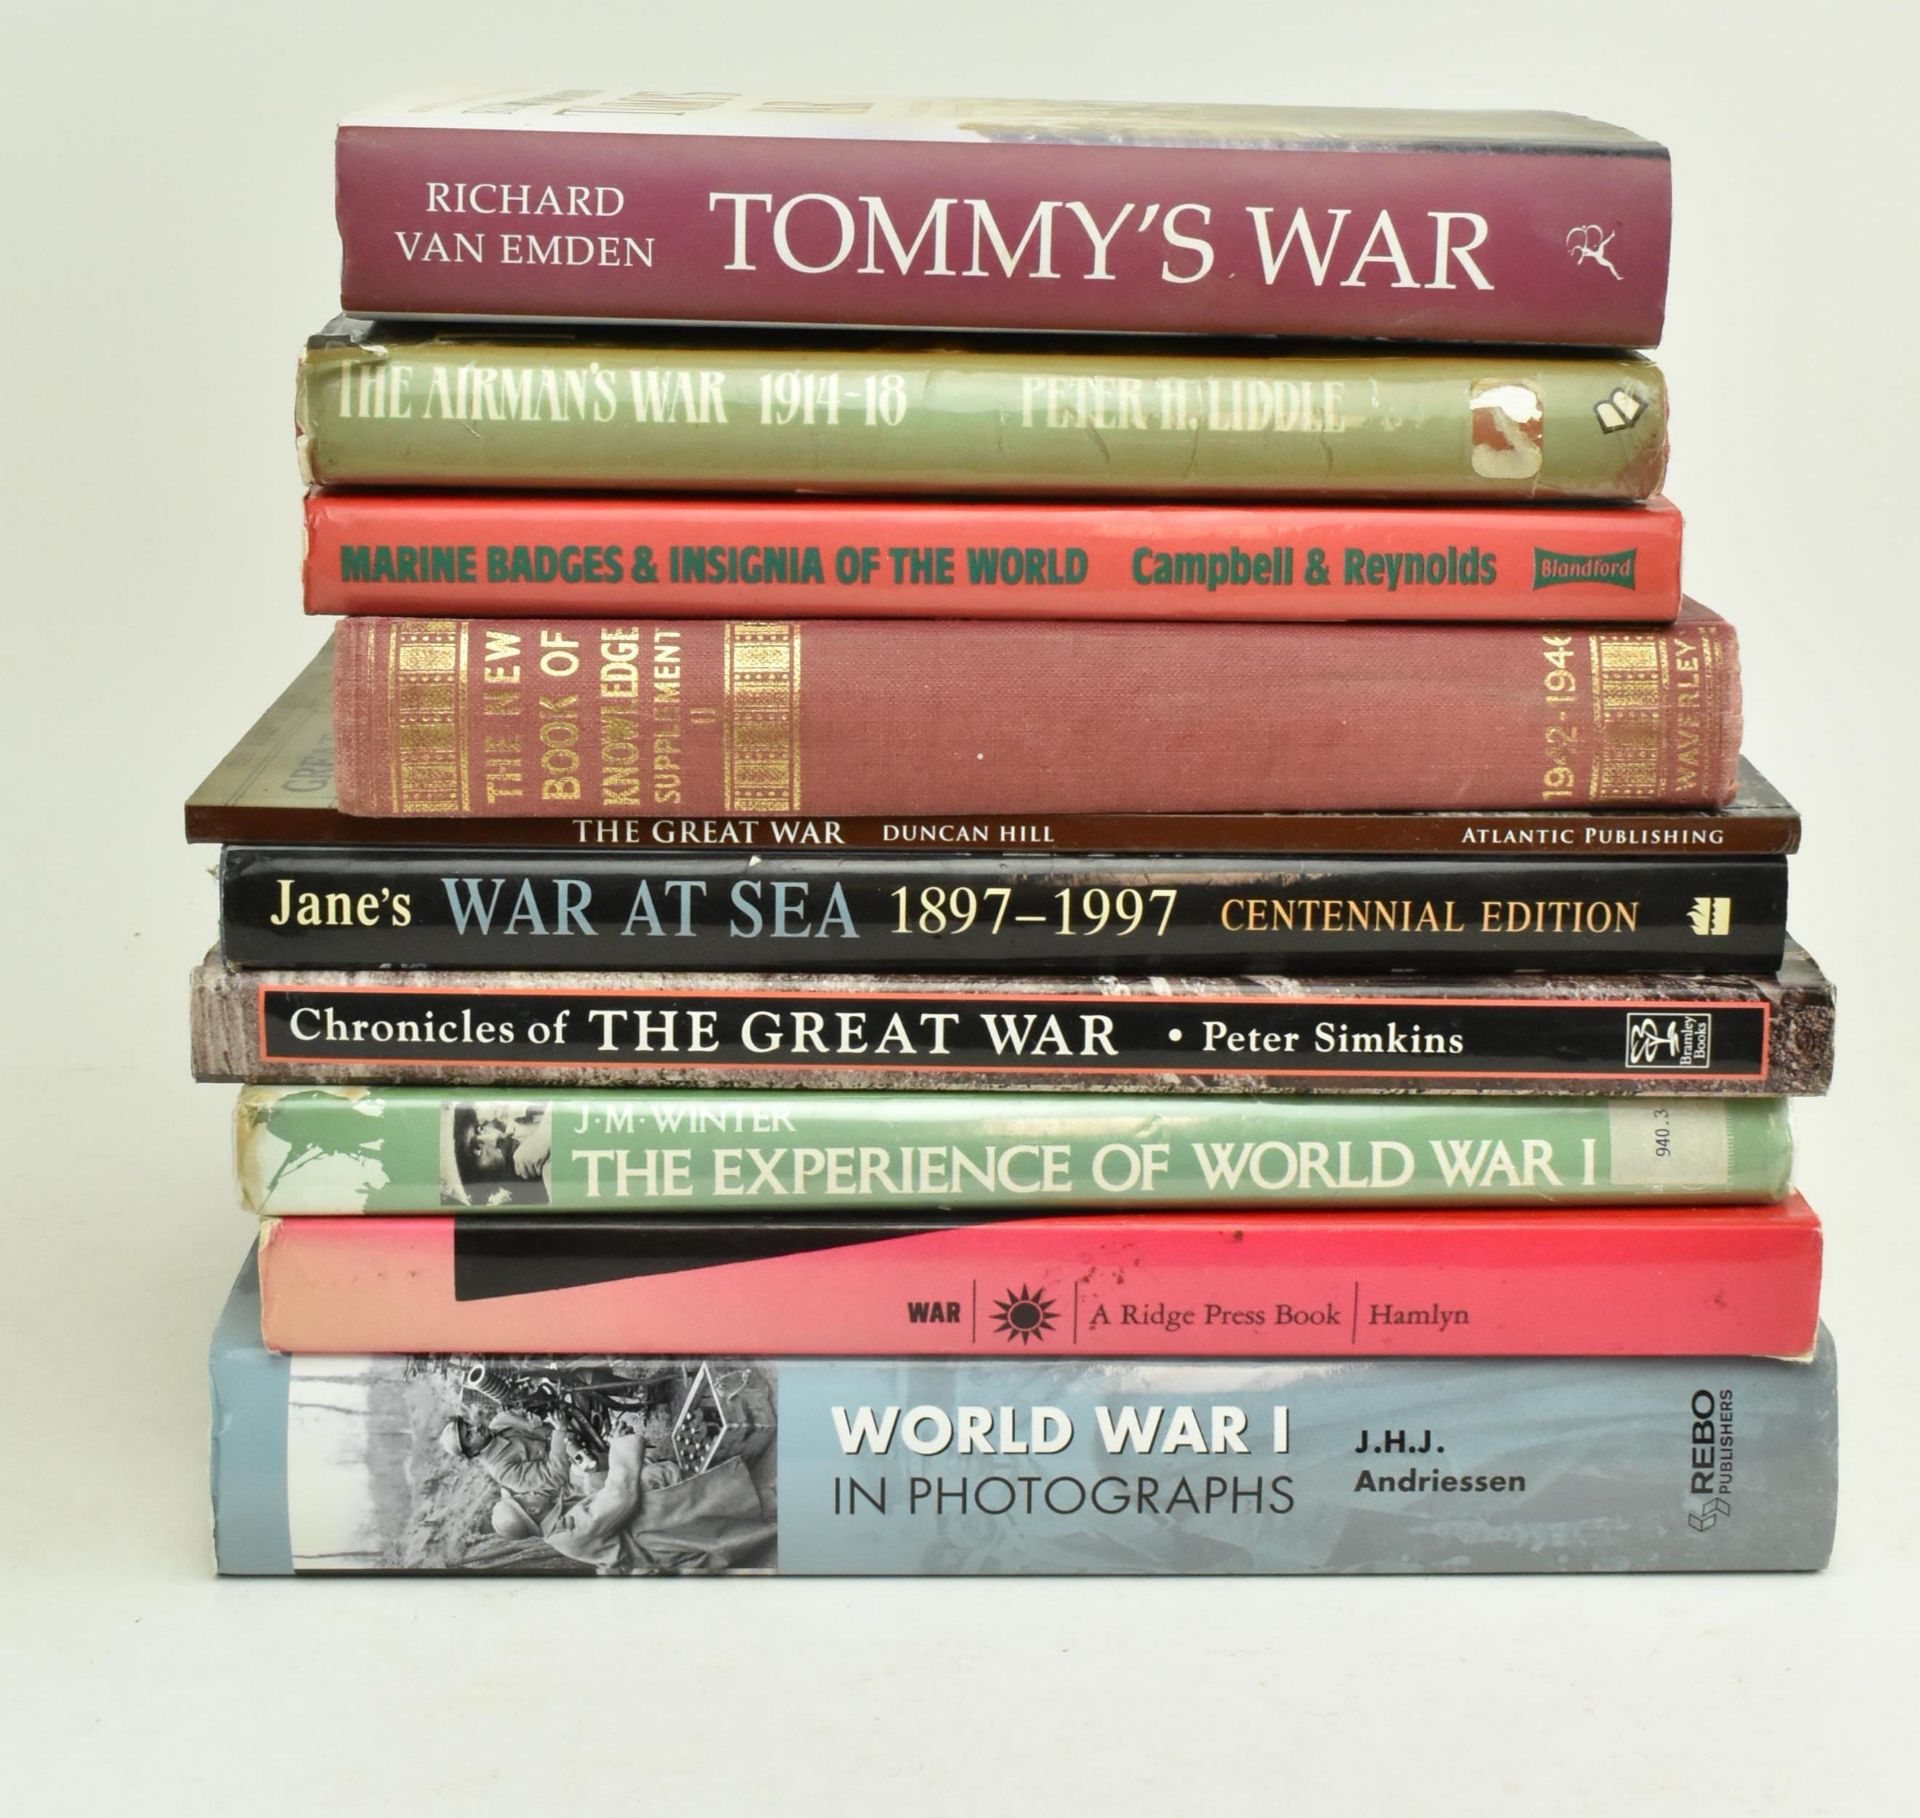 WWI MILITARY HISTORY. COLLECTION OF REFERENCE BOOKS - Image 3 of 6